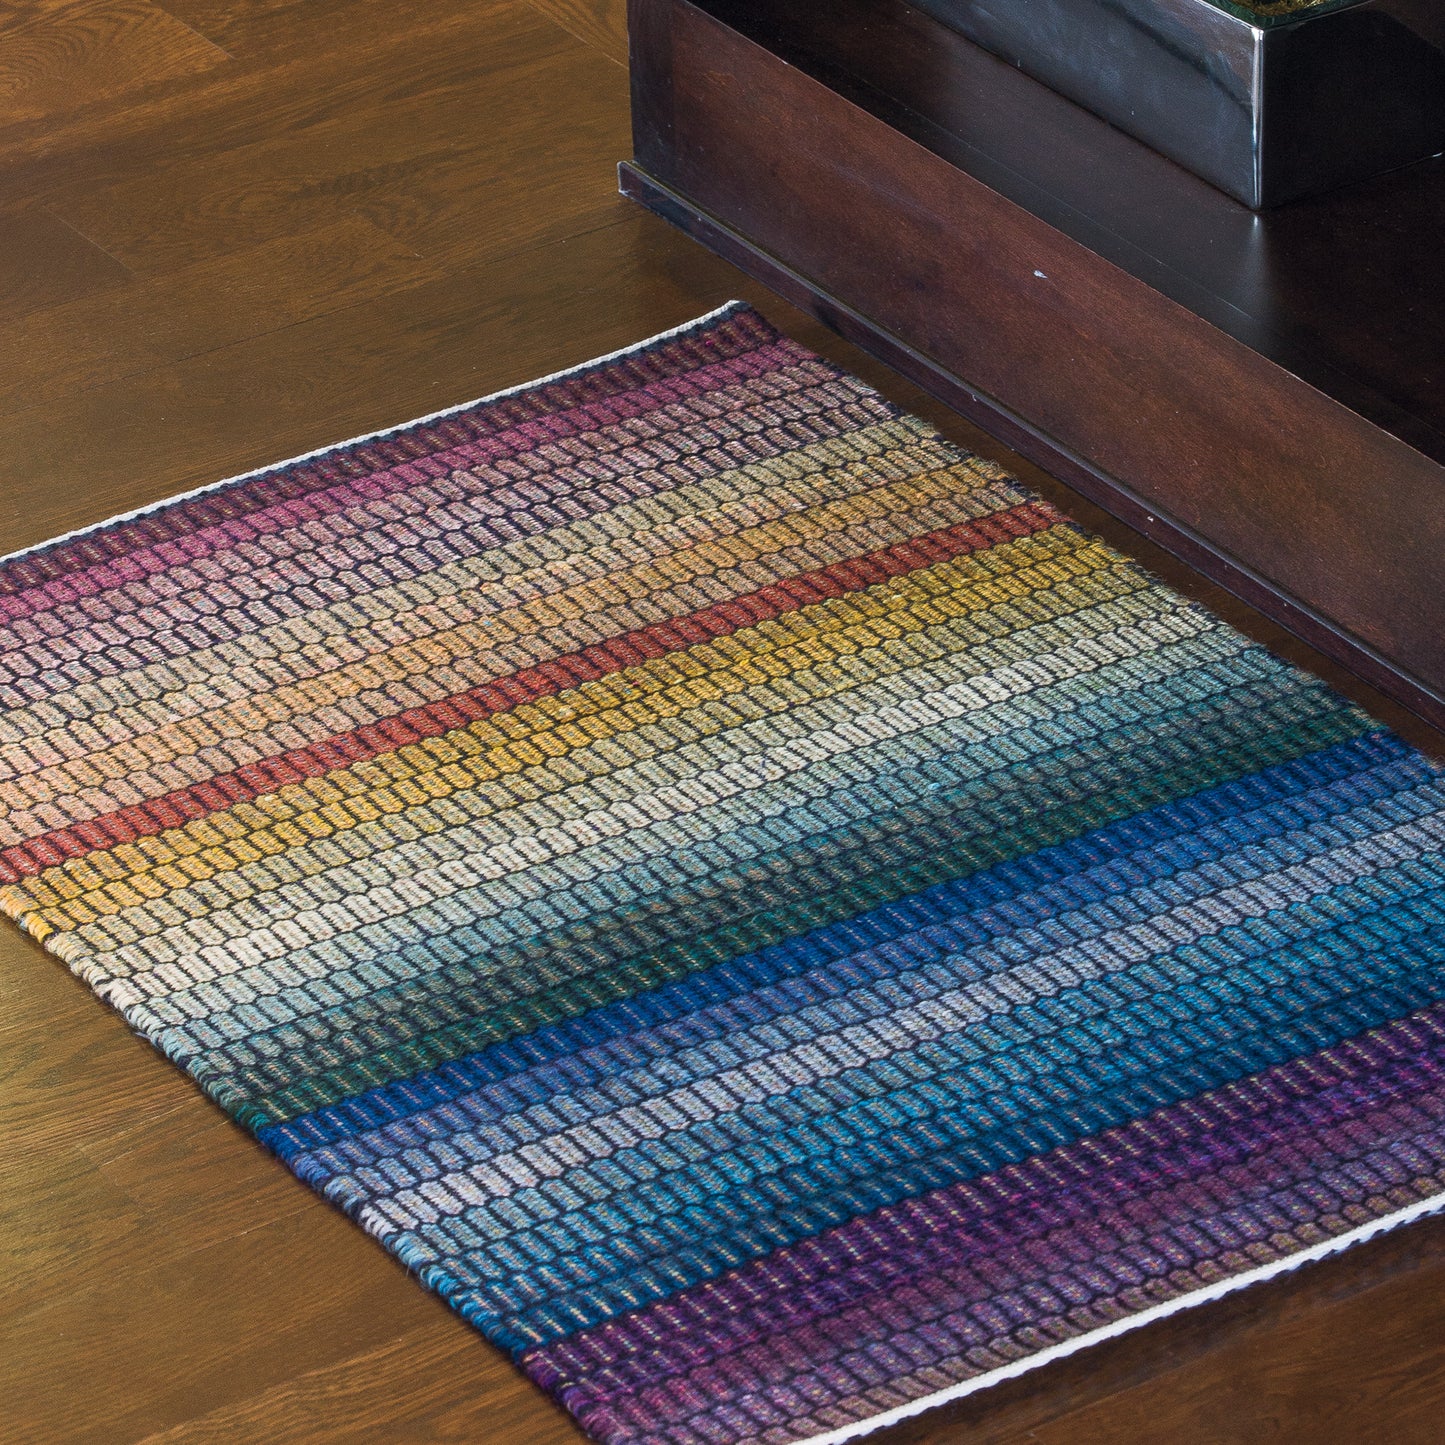 Boundweave Projects: Weft-Faced Weaving for Beautiful Rugs eBook